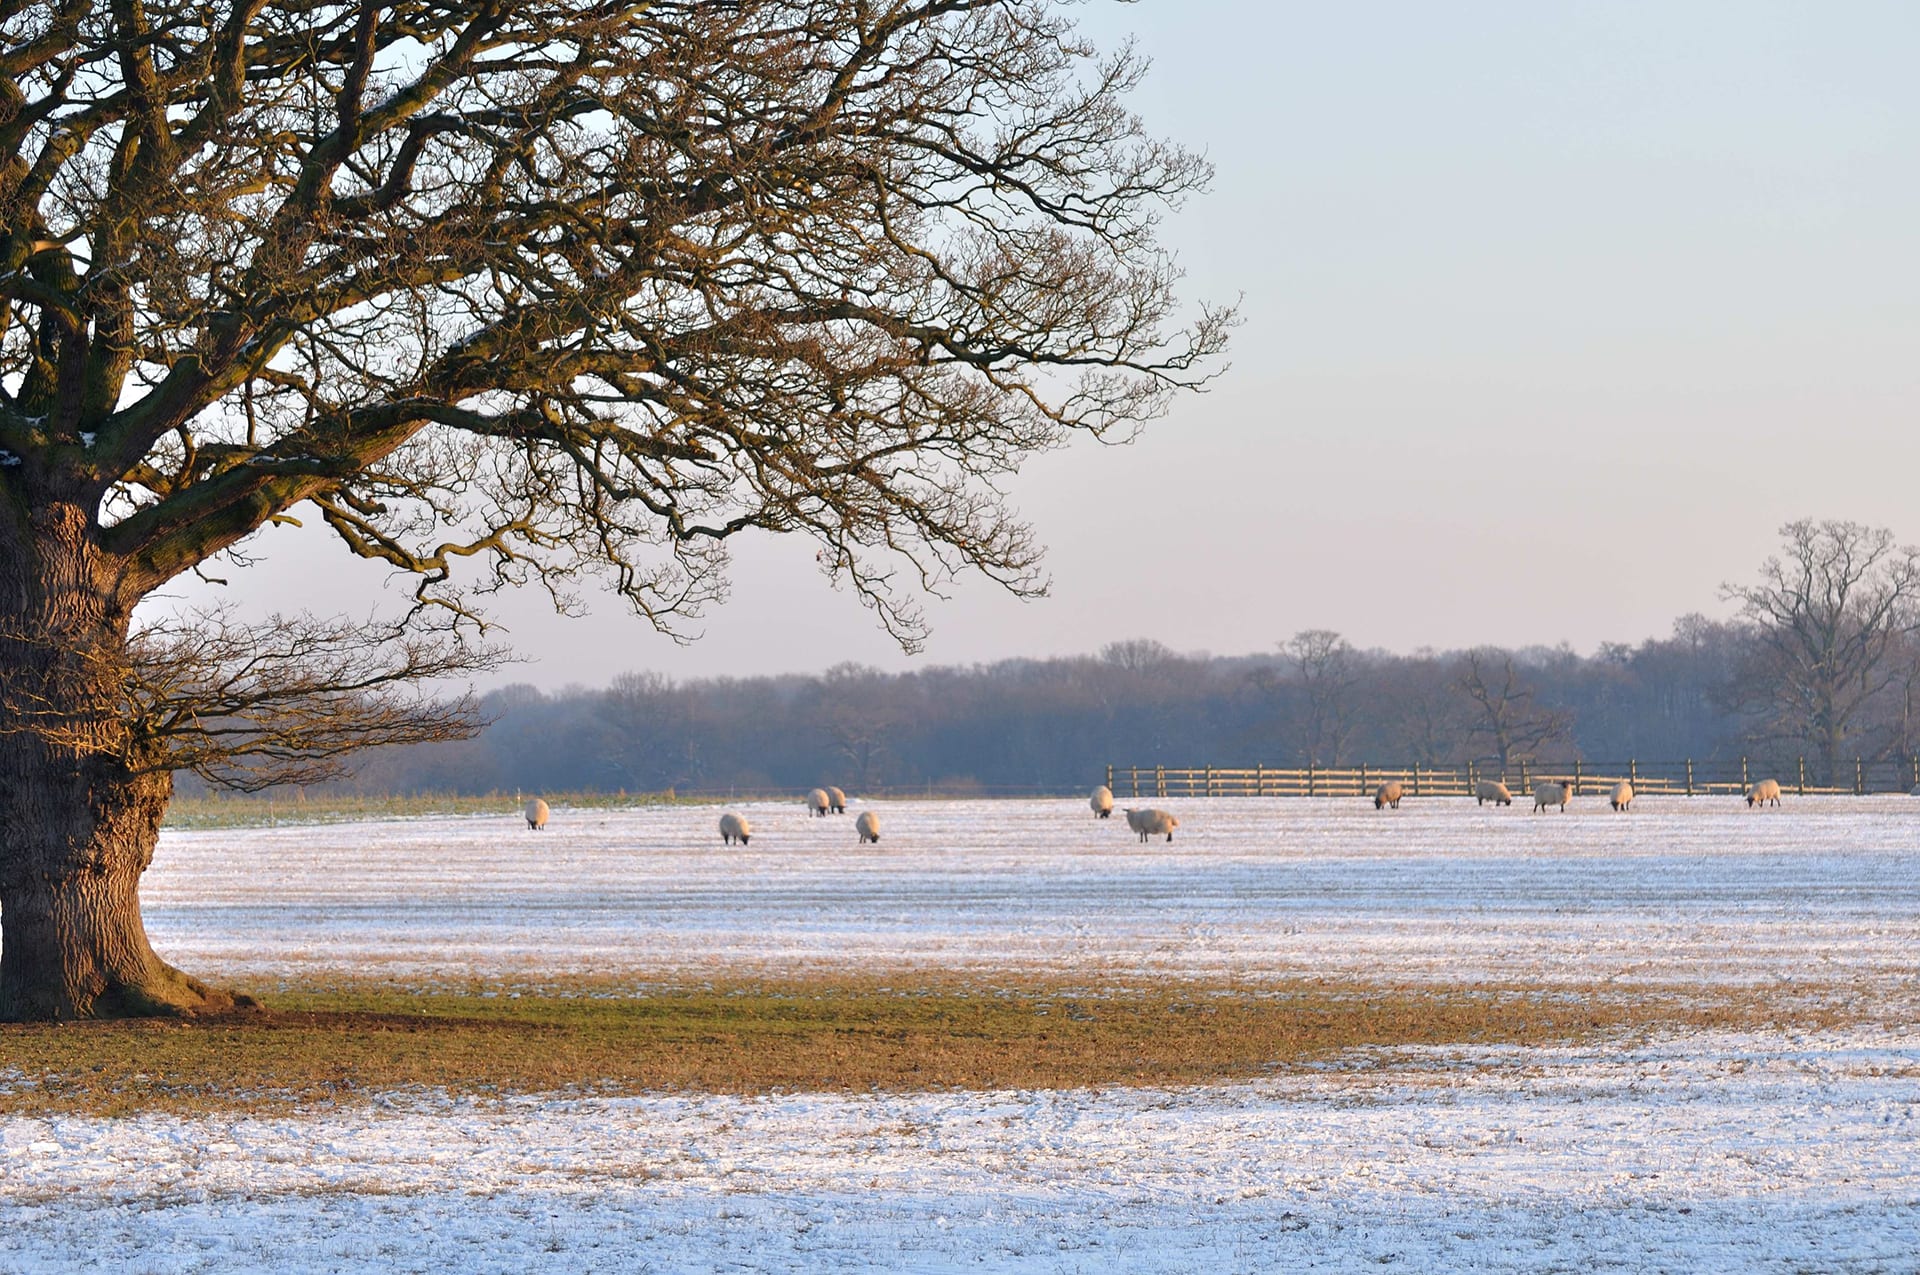 Background Image of a snowy field - starfishaccounting.co.uk